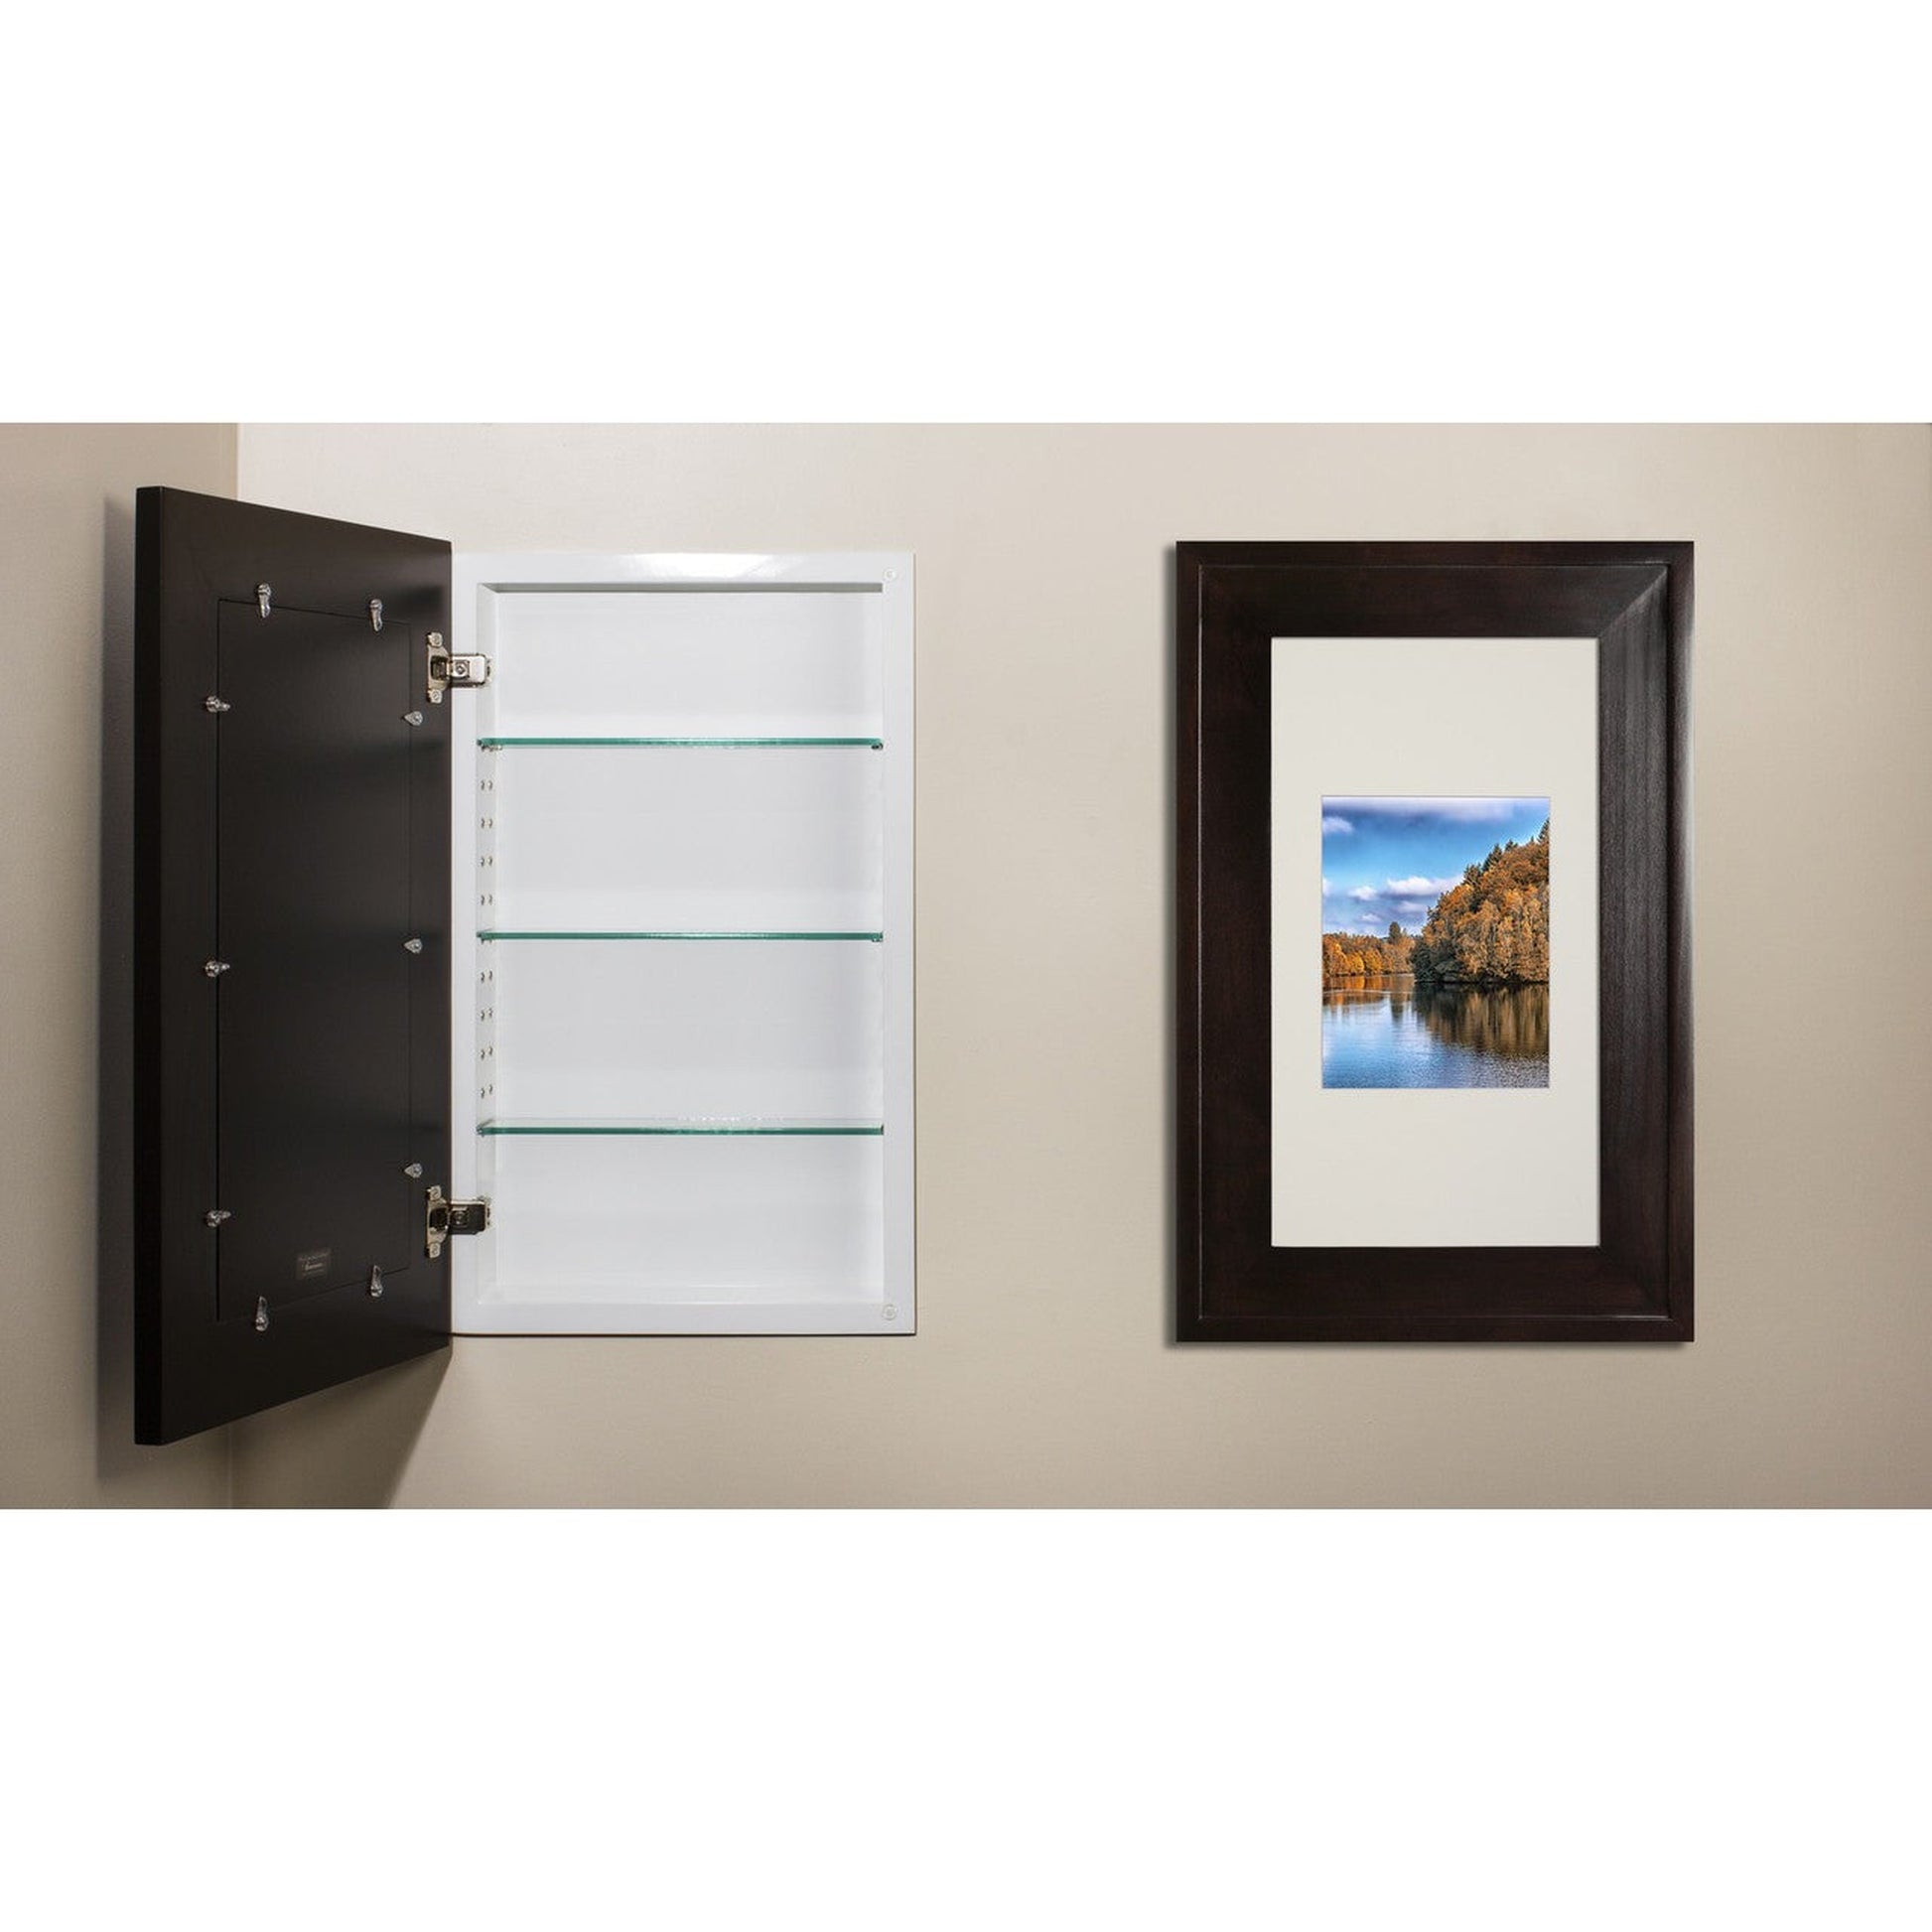 Fox Hollow Furnishings 14" x 24" Coffee Bean Extra Large White Interior Special 6" Depth Recessed Picture Frame Medicine Cabinet